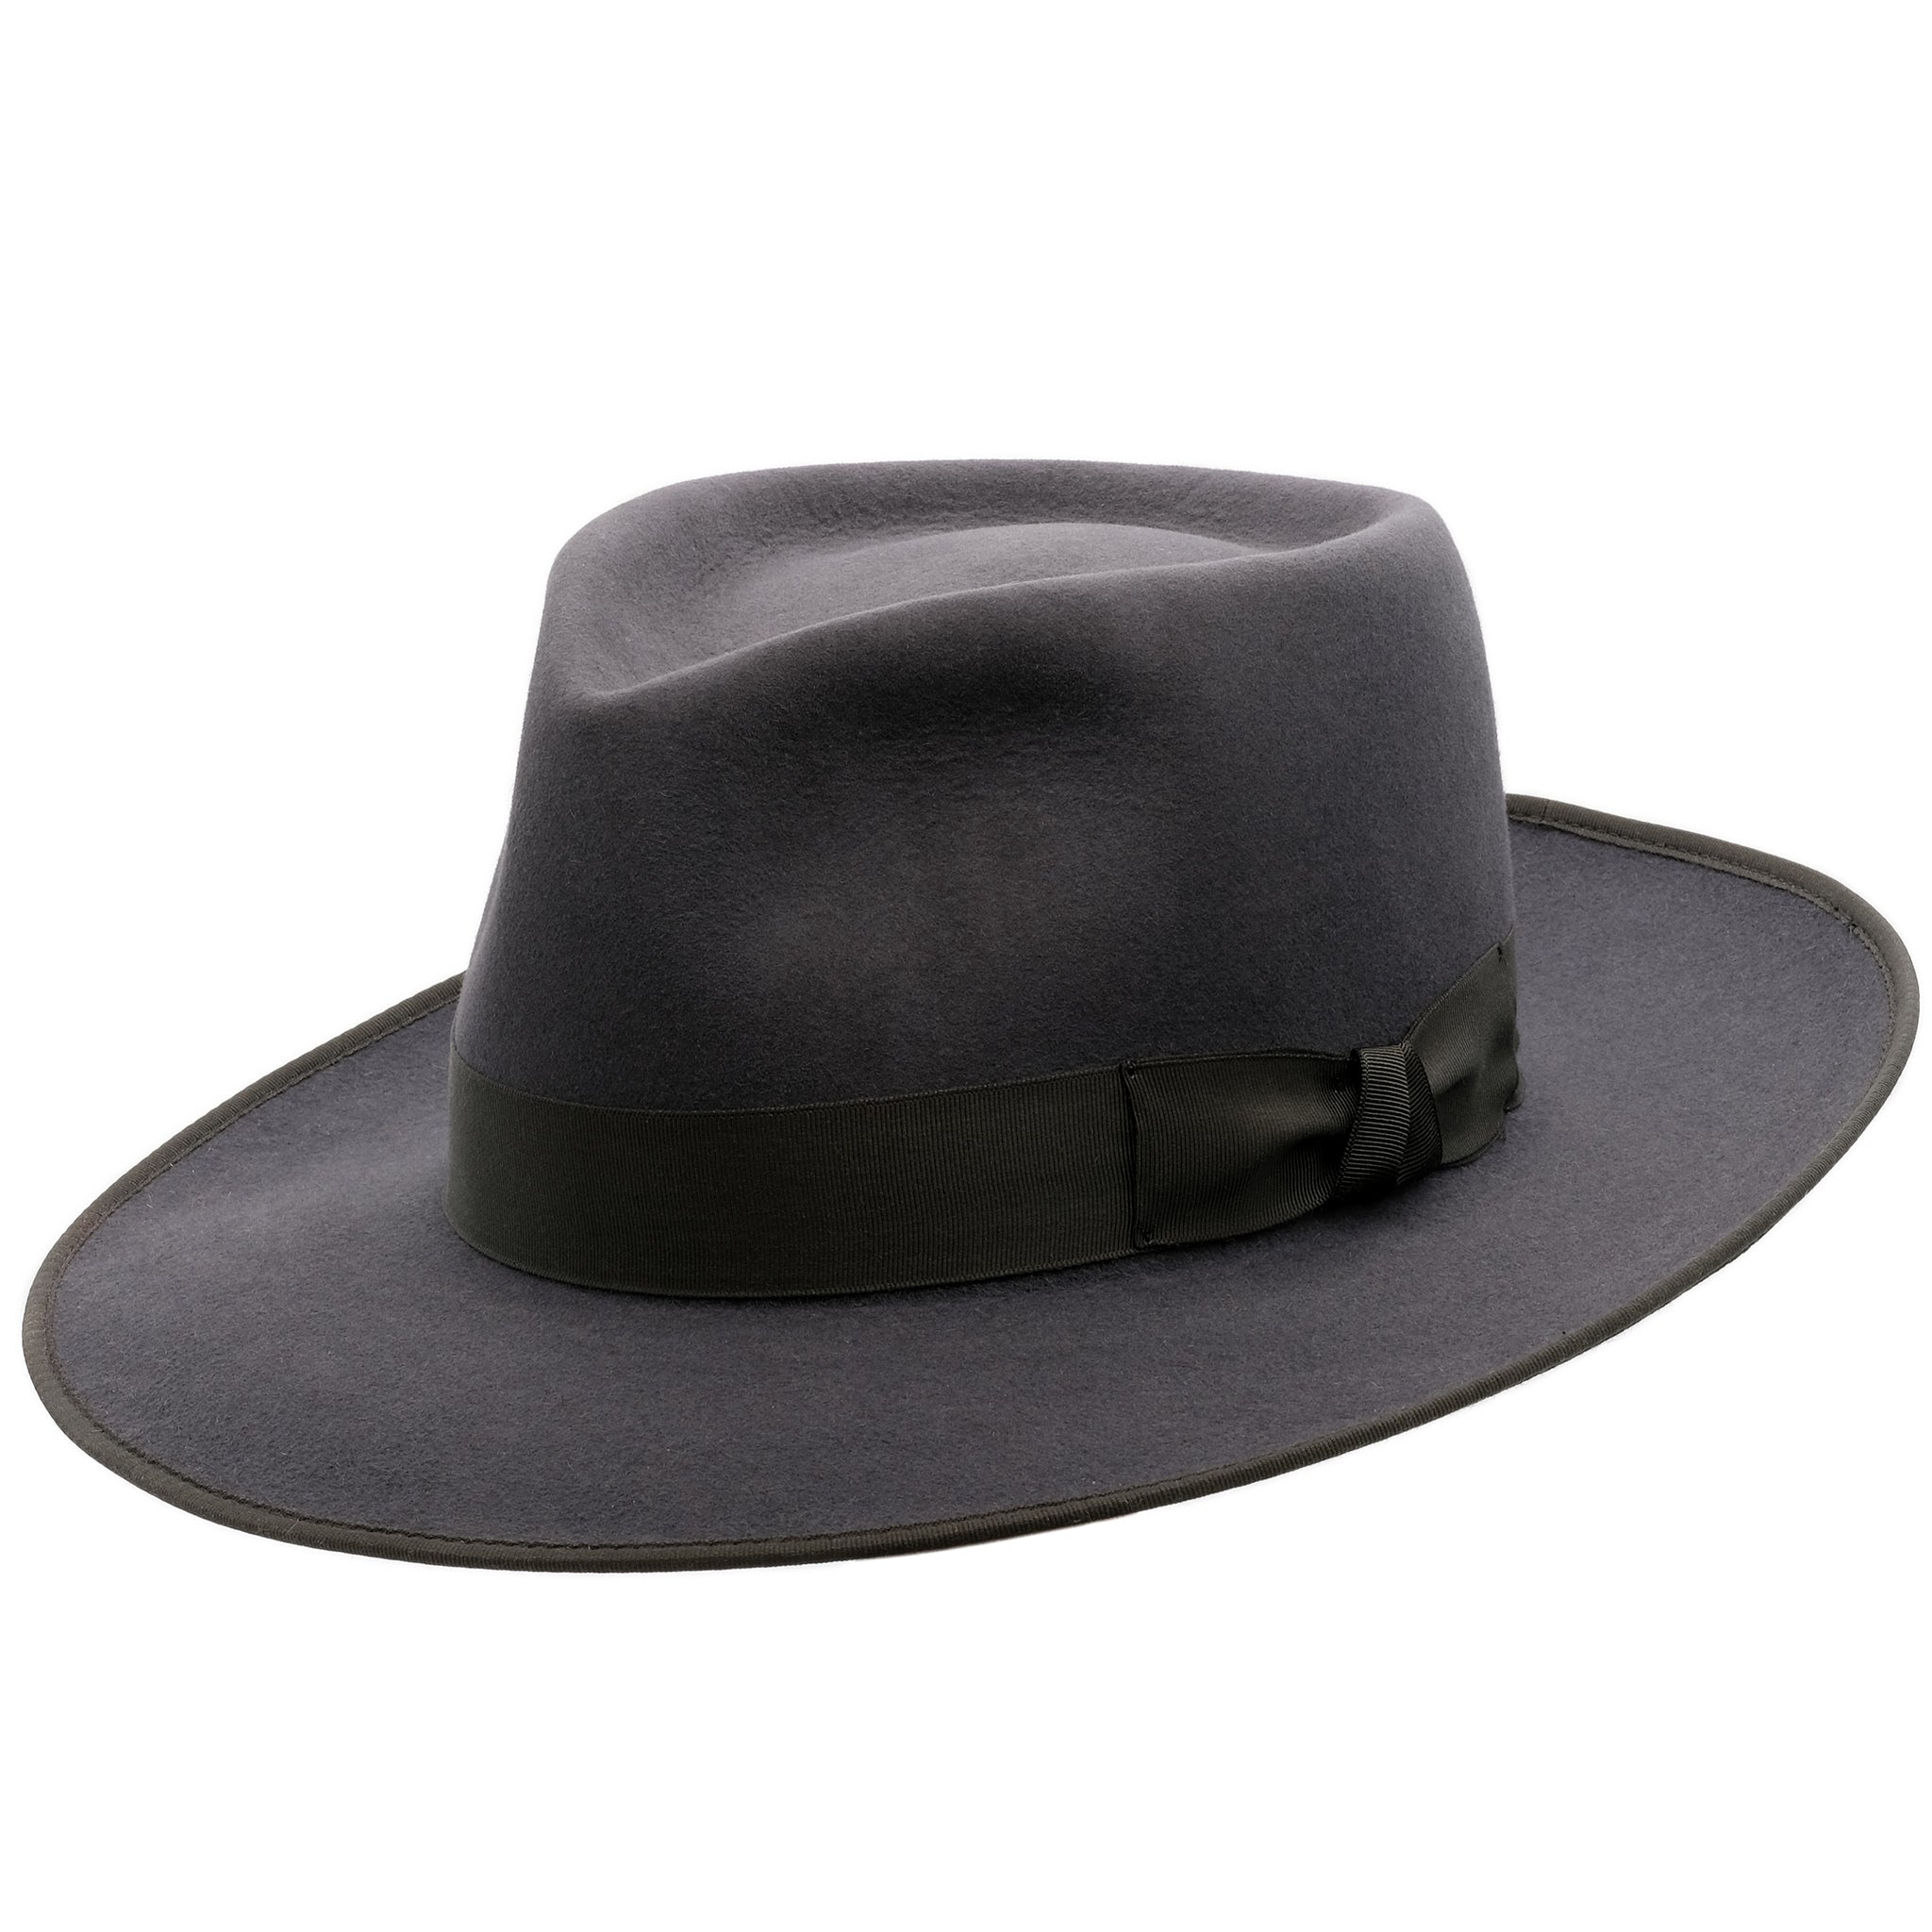 Angle view of Akubra Squatter hat in Carbon grey colour, shown with shaped crown